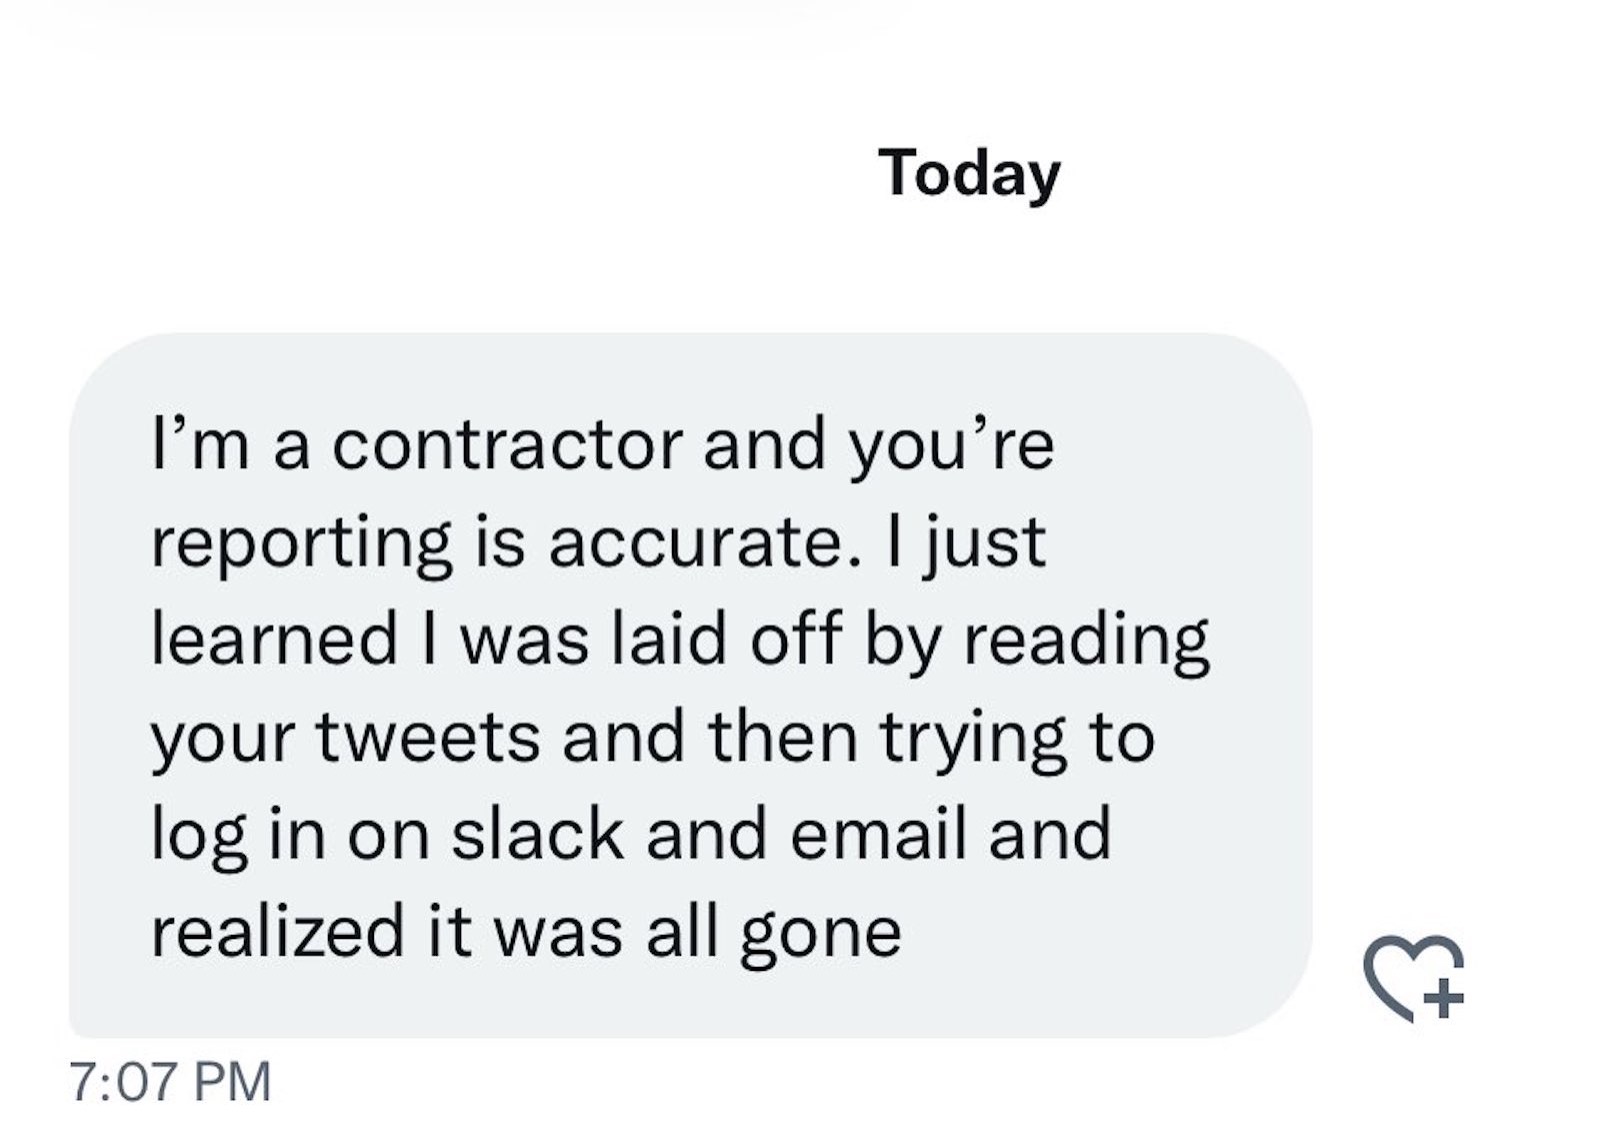 Contractor that was laid off from twitter